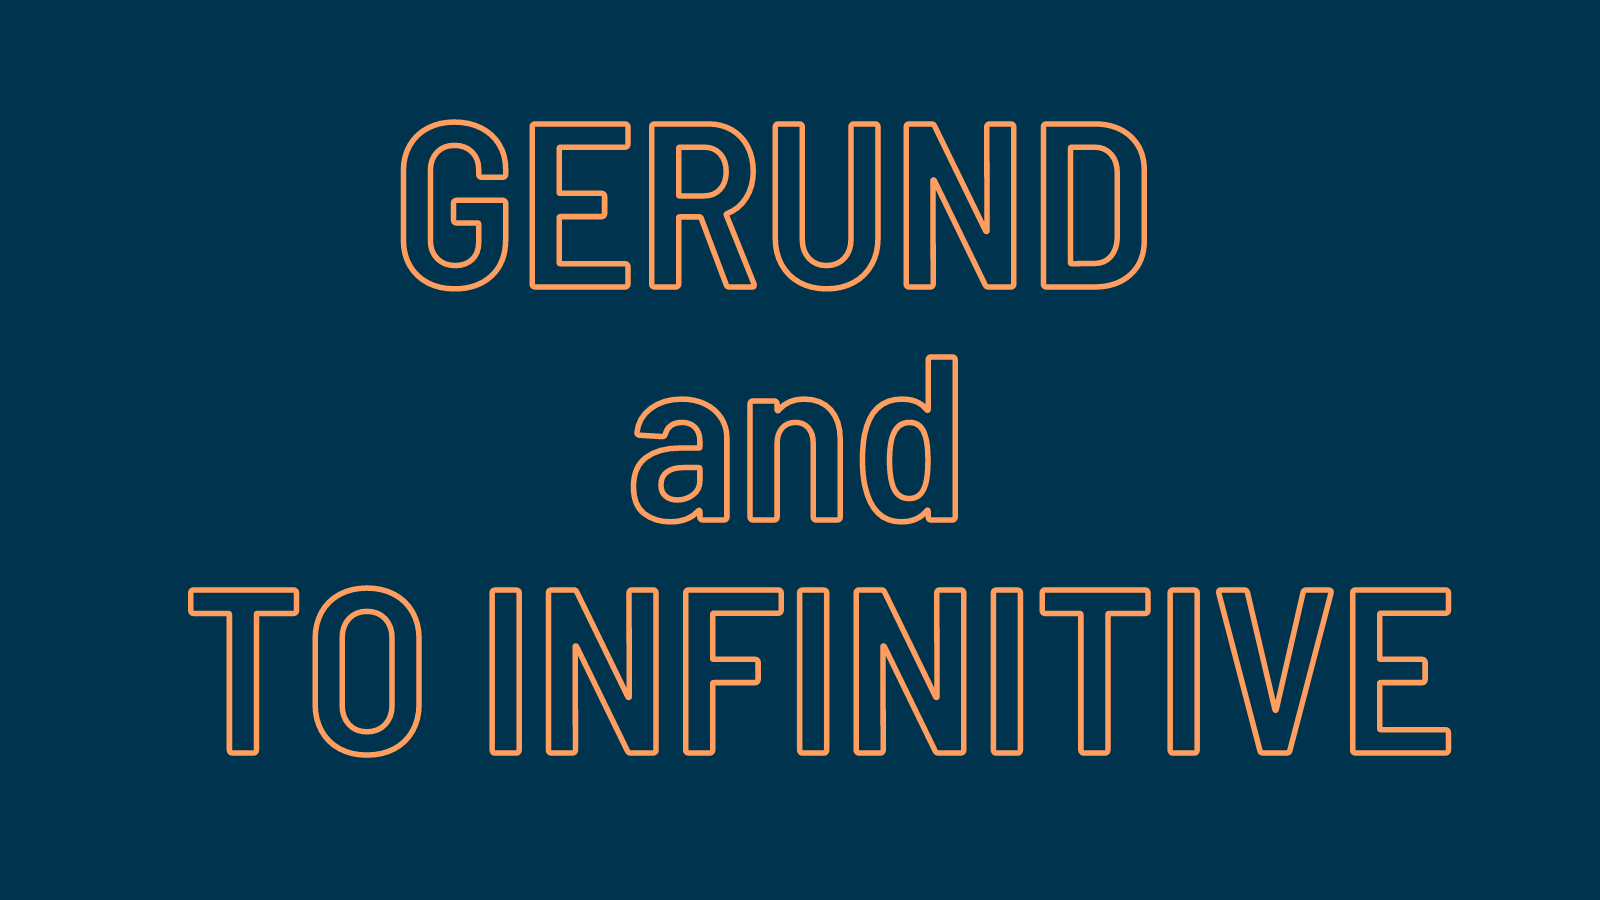 Read more about the article Gerund และ to infinitive แกรมม่าต้องรู้ก่อนสอบ TOEIC